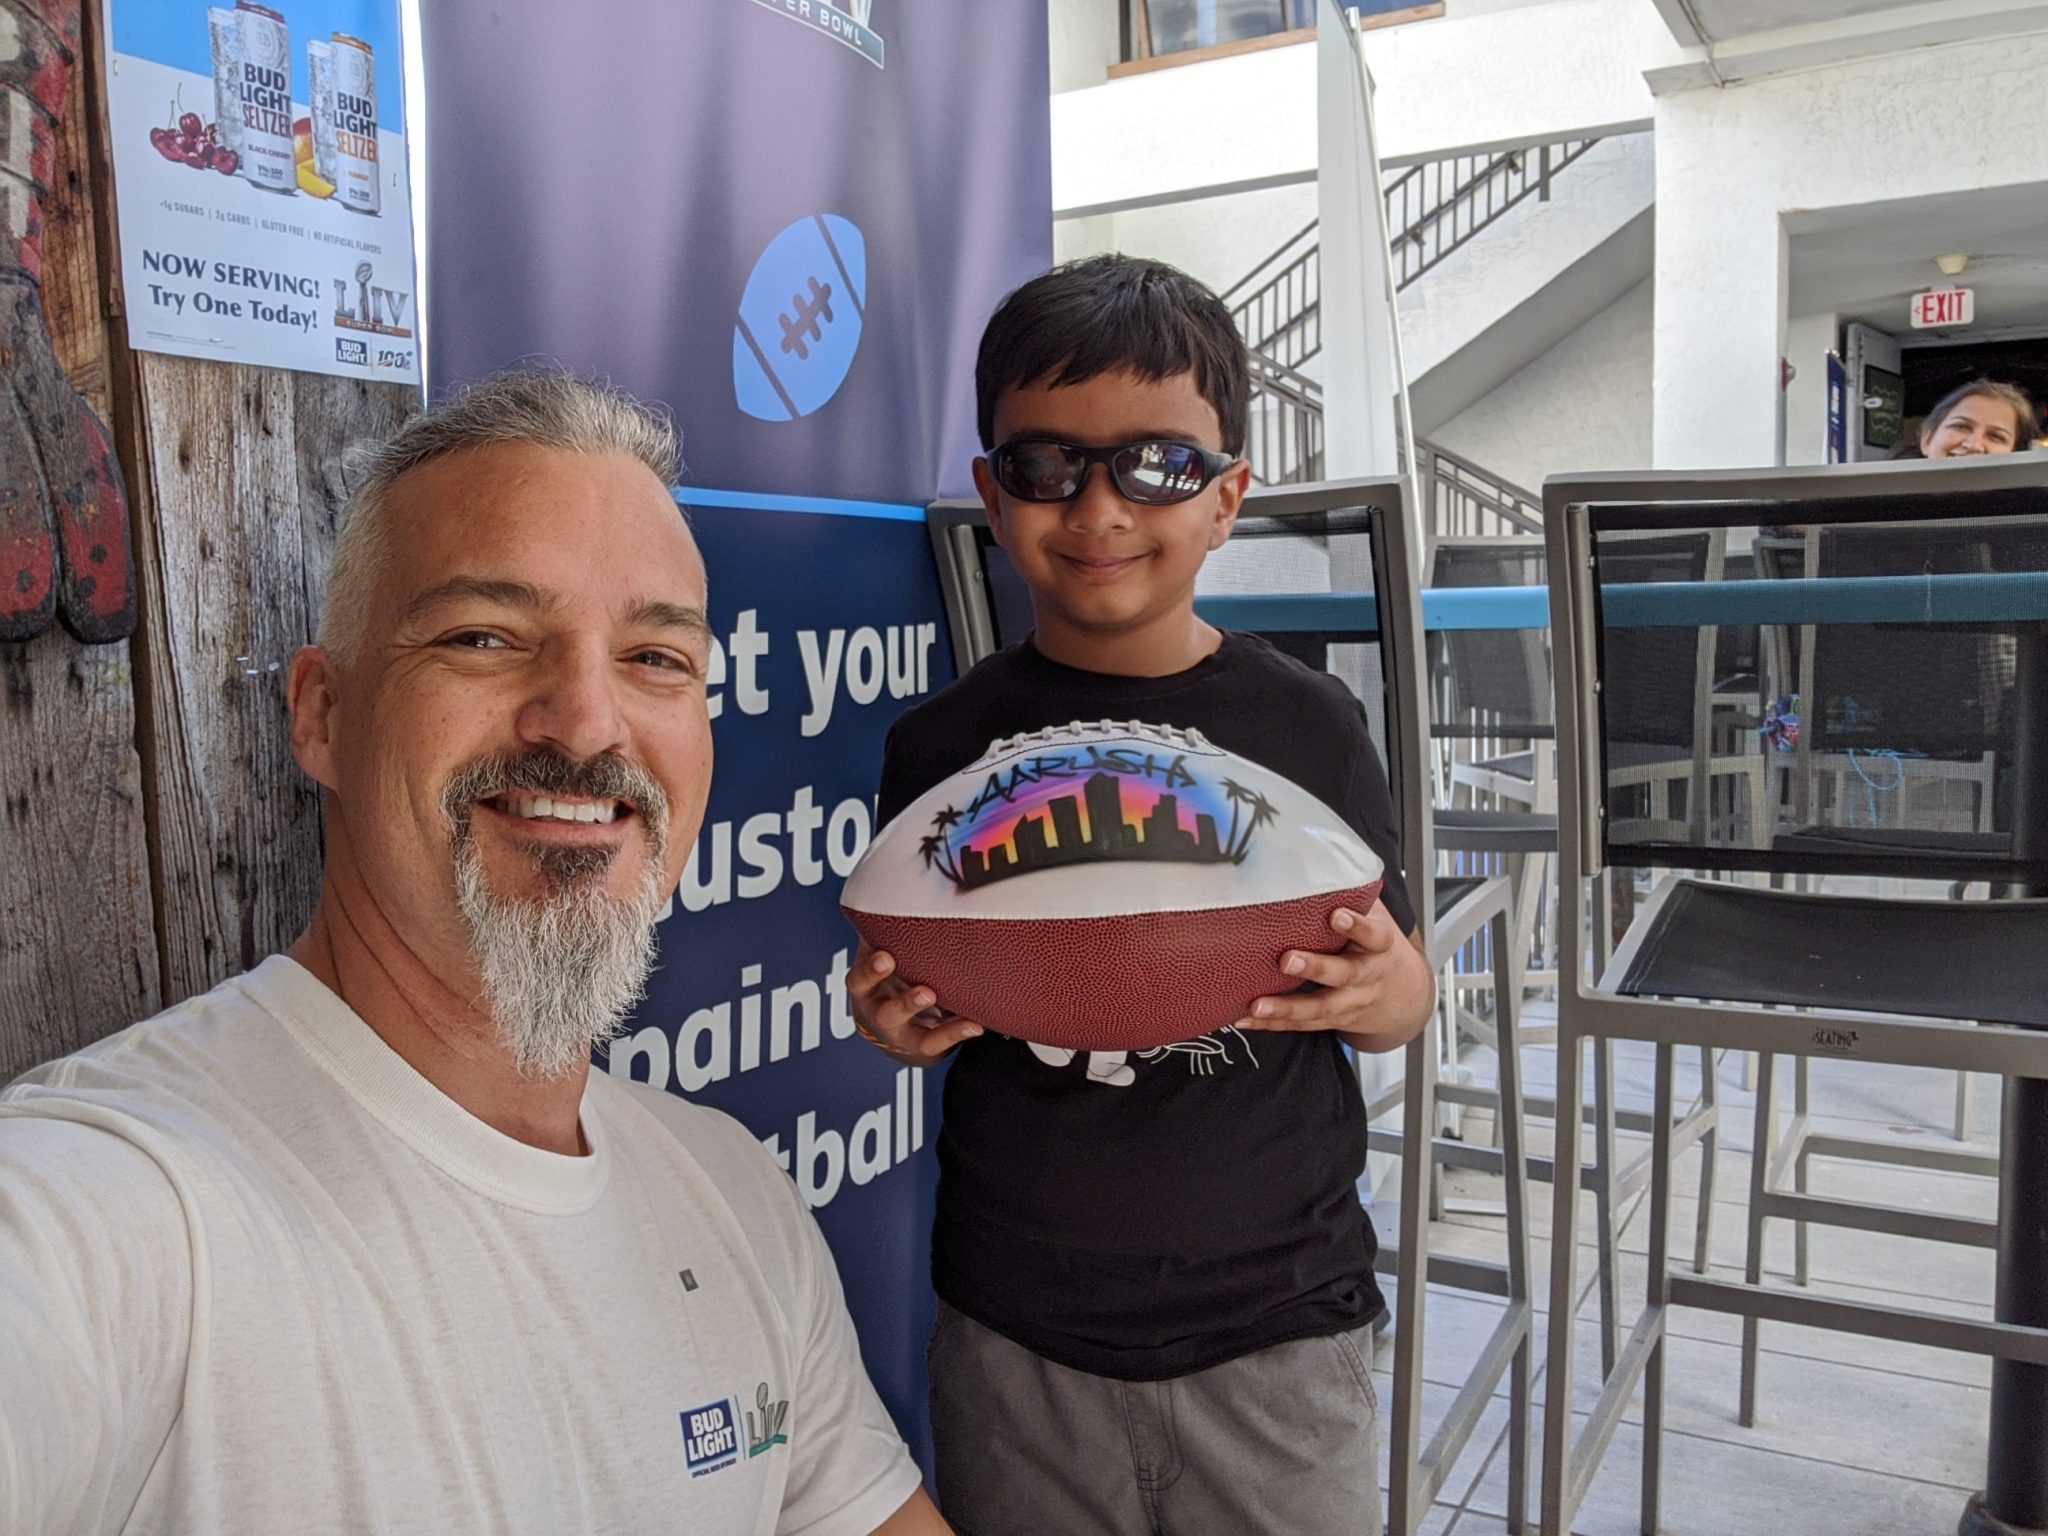 Pete poses with a young boy holding a football that has fresh airbrush paint on it.